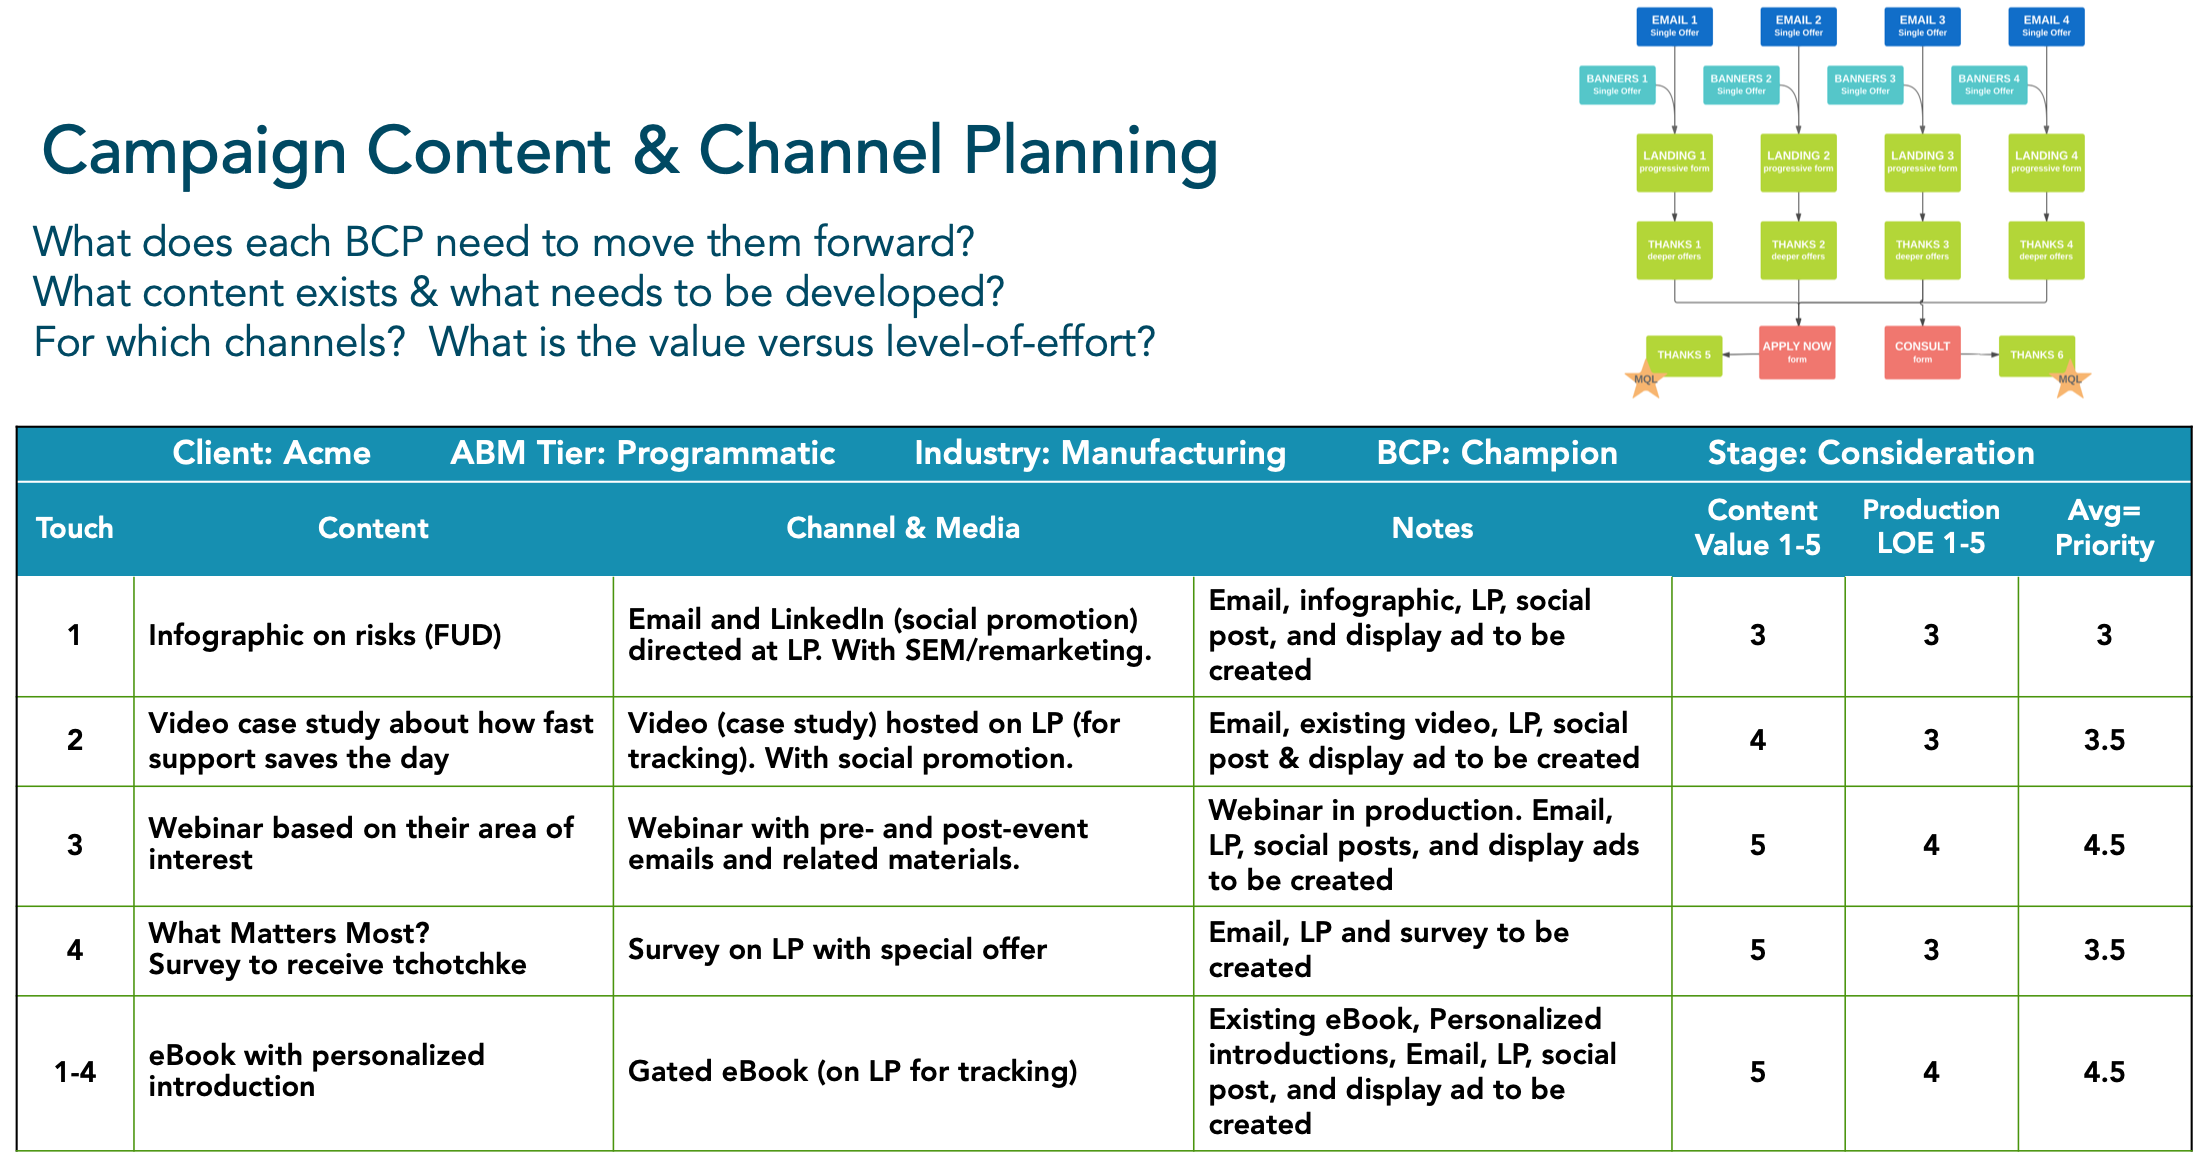 Campaign Content and Channel Planning example, a necessary step in Account-Based Marketing strategy planning